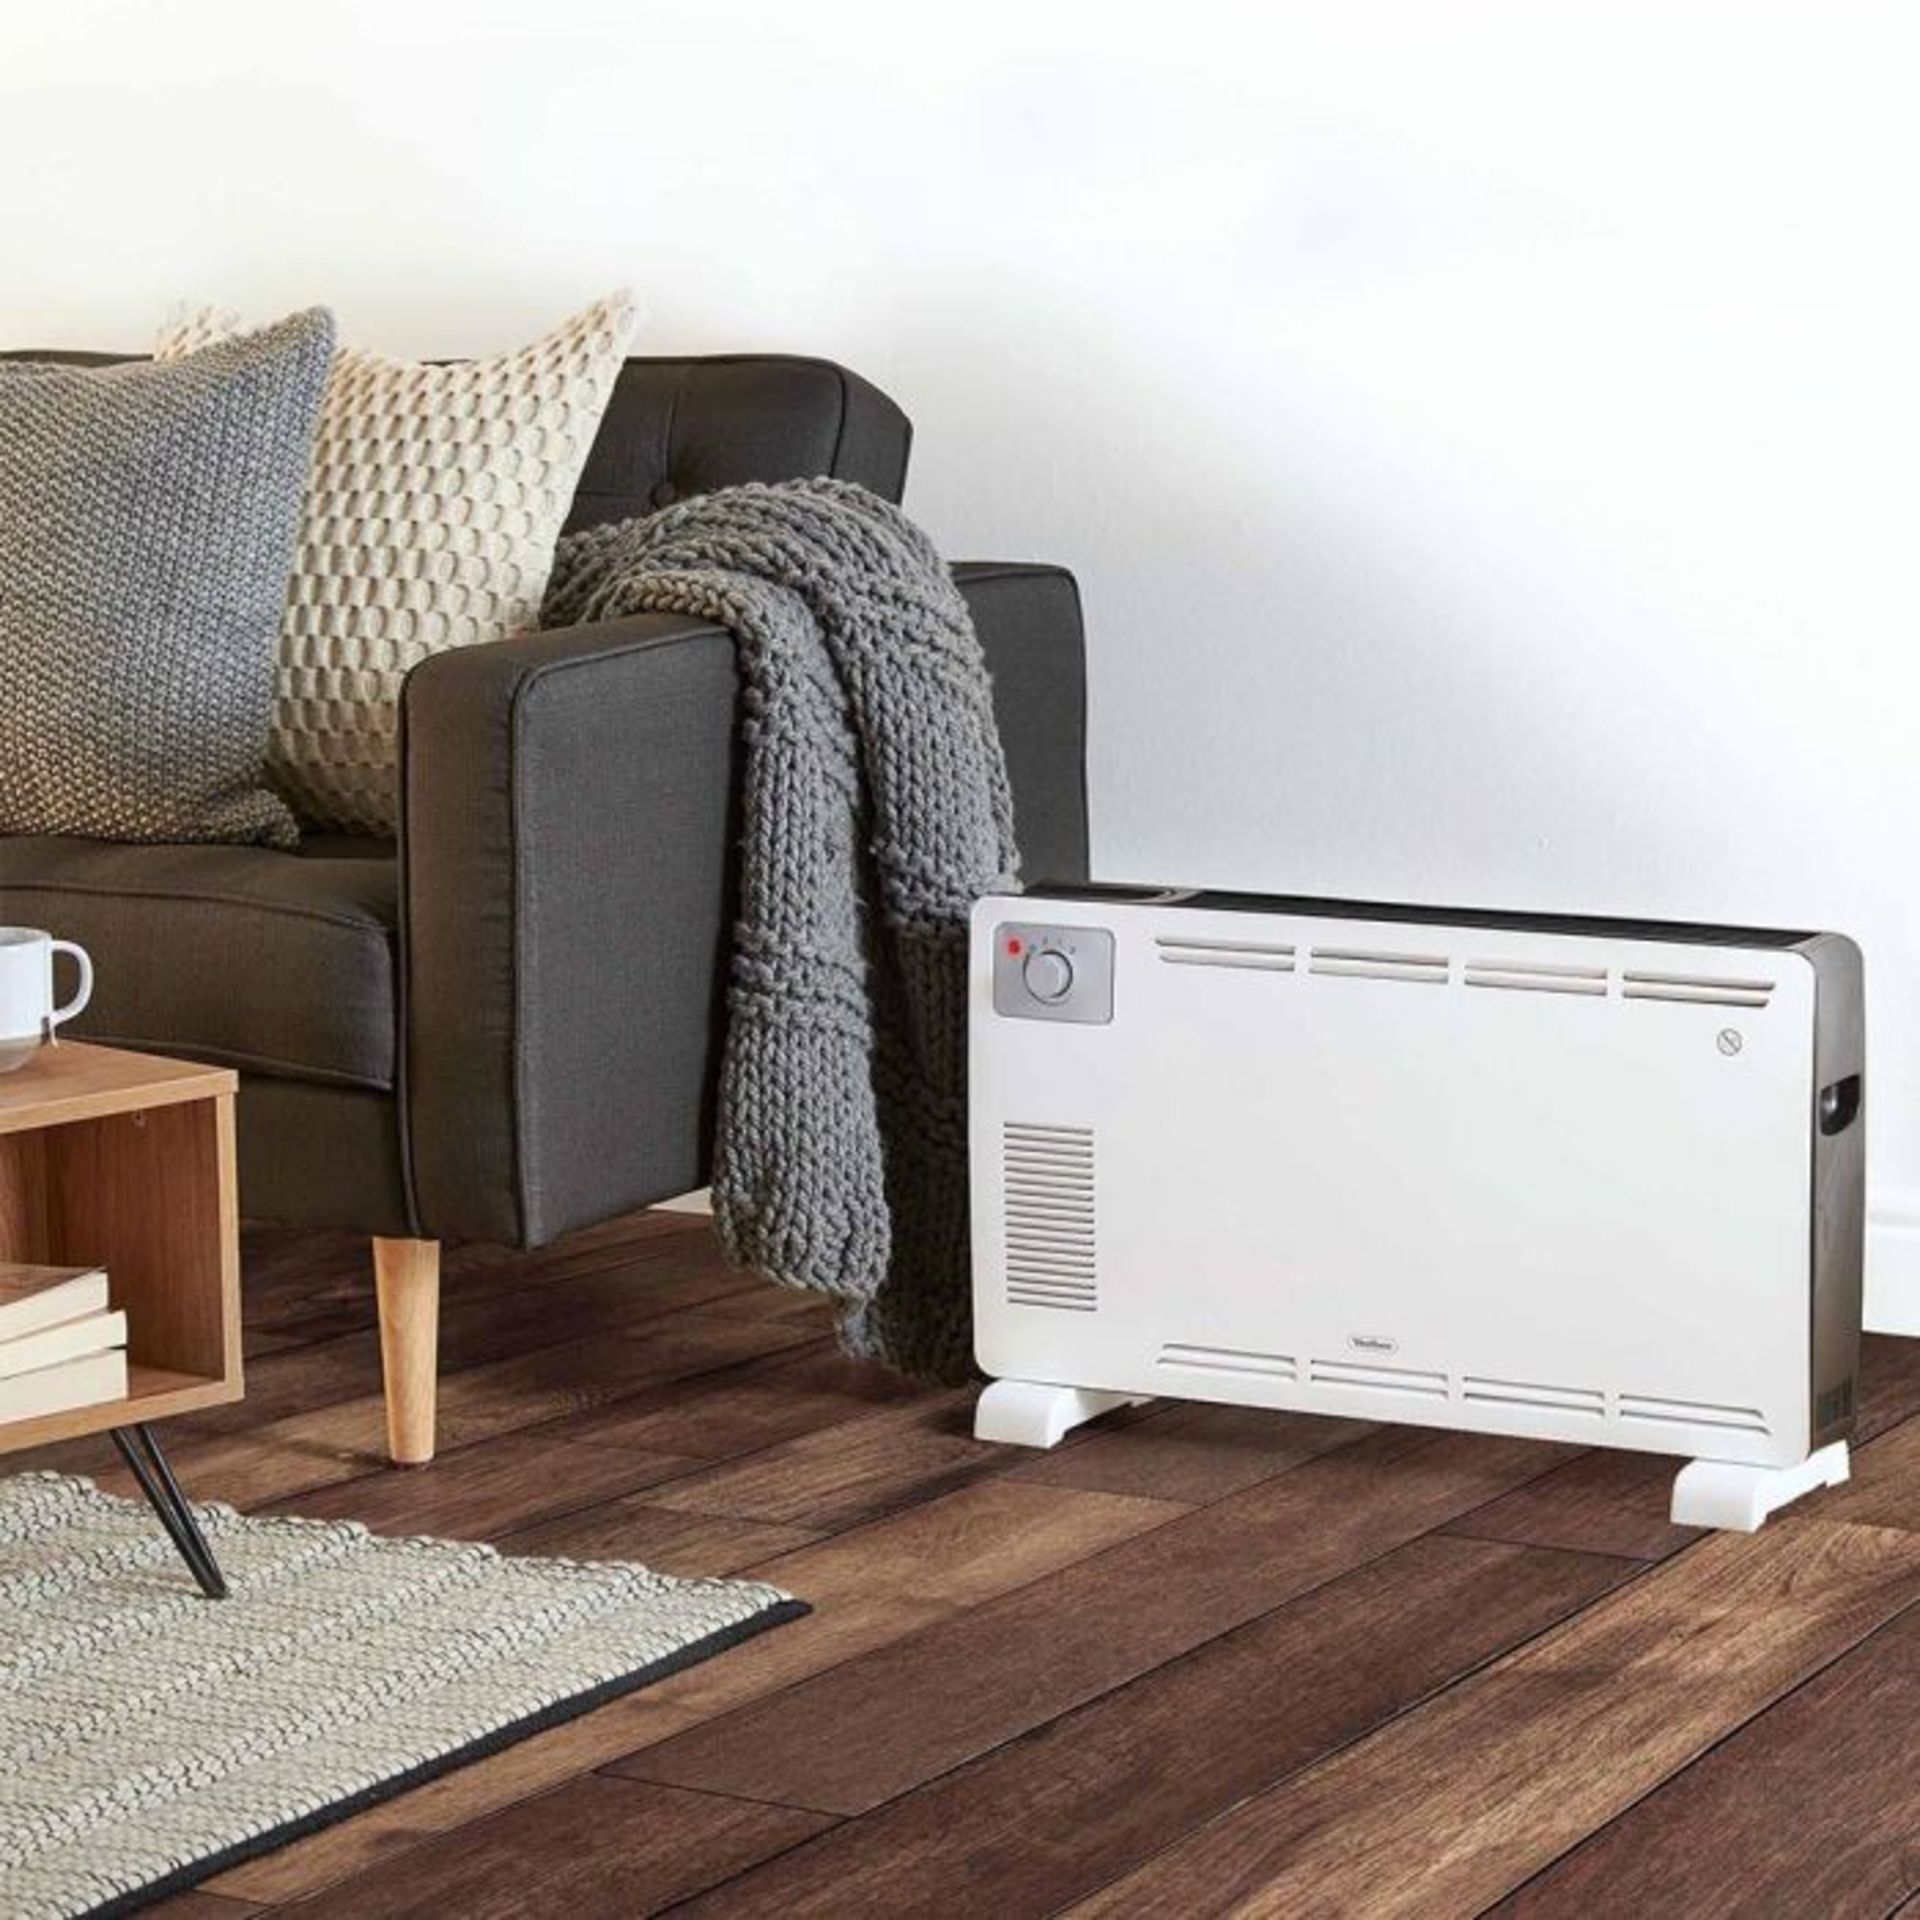 2200W Convector Heater - White. This convector heats up quickly thanks to convection technology. - Image 2 of 5